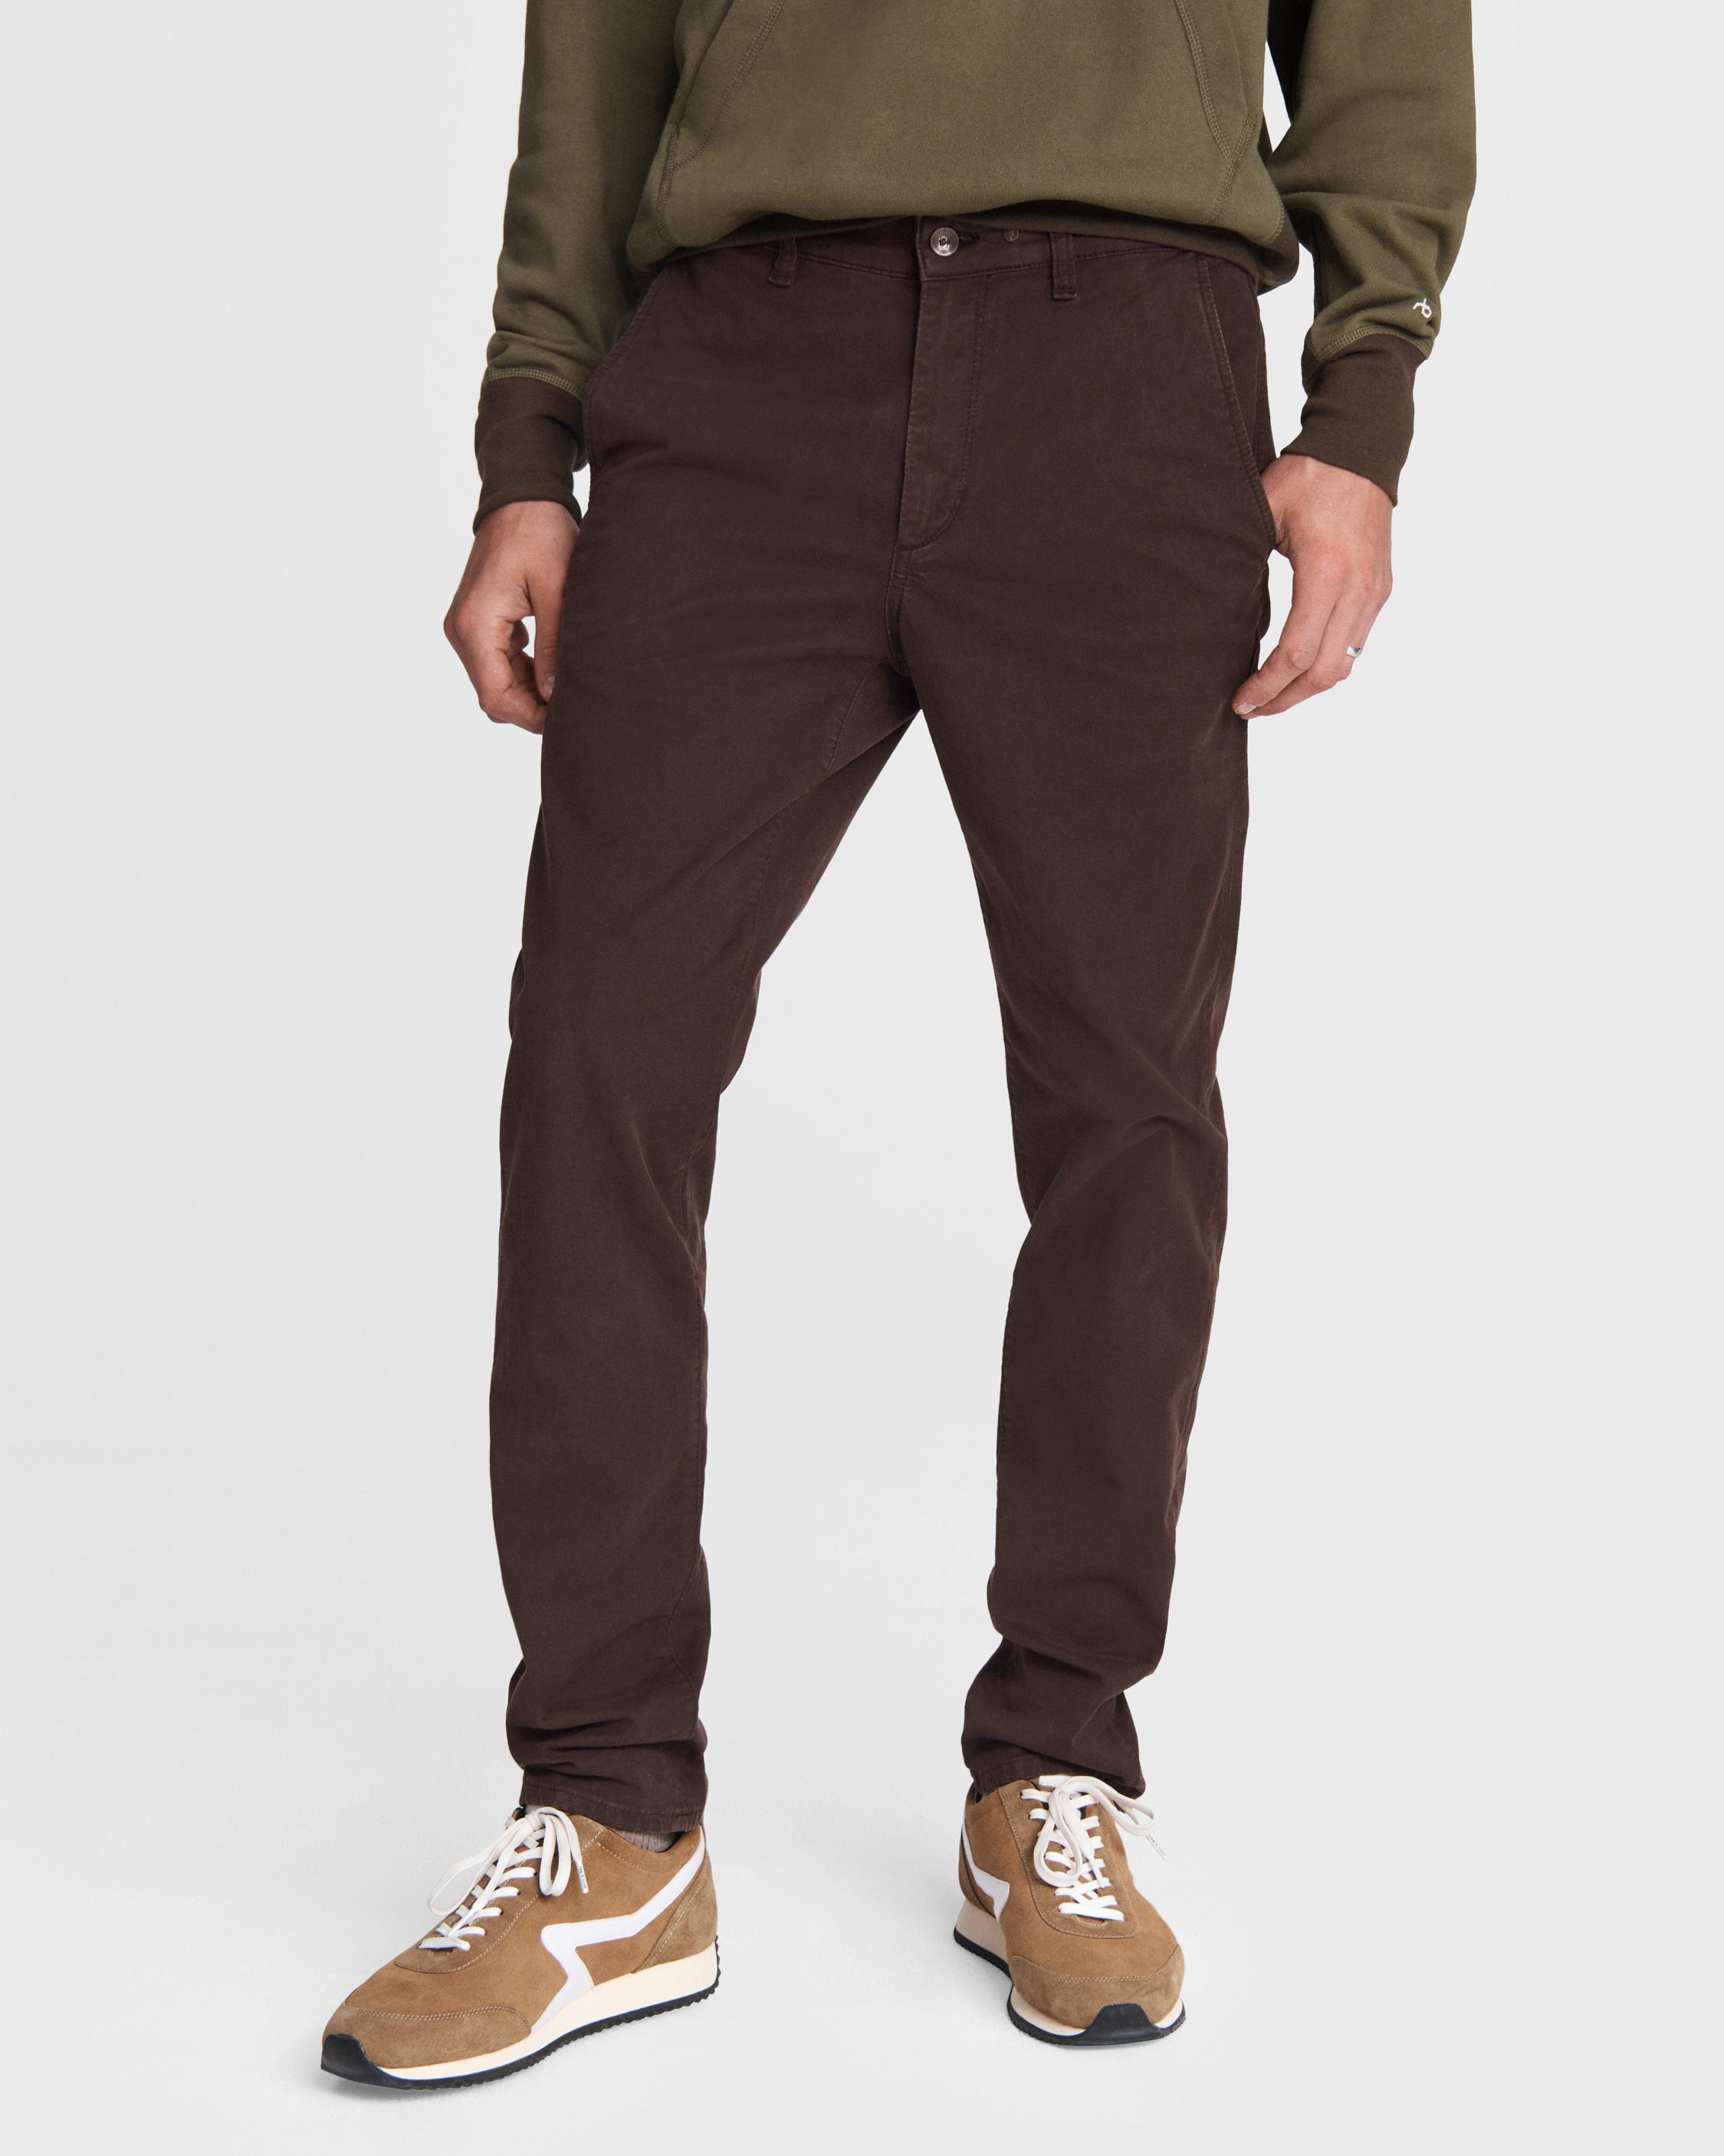 Shop the Fit 2 Mid-rise Chino